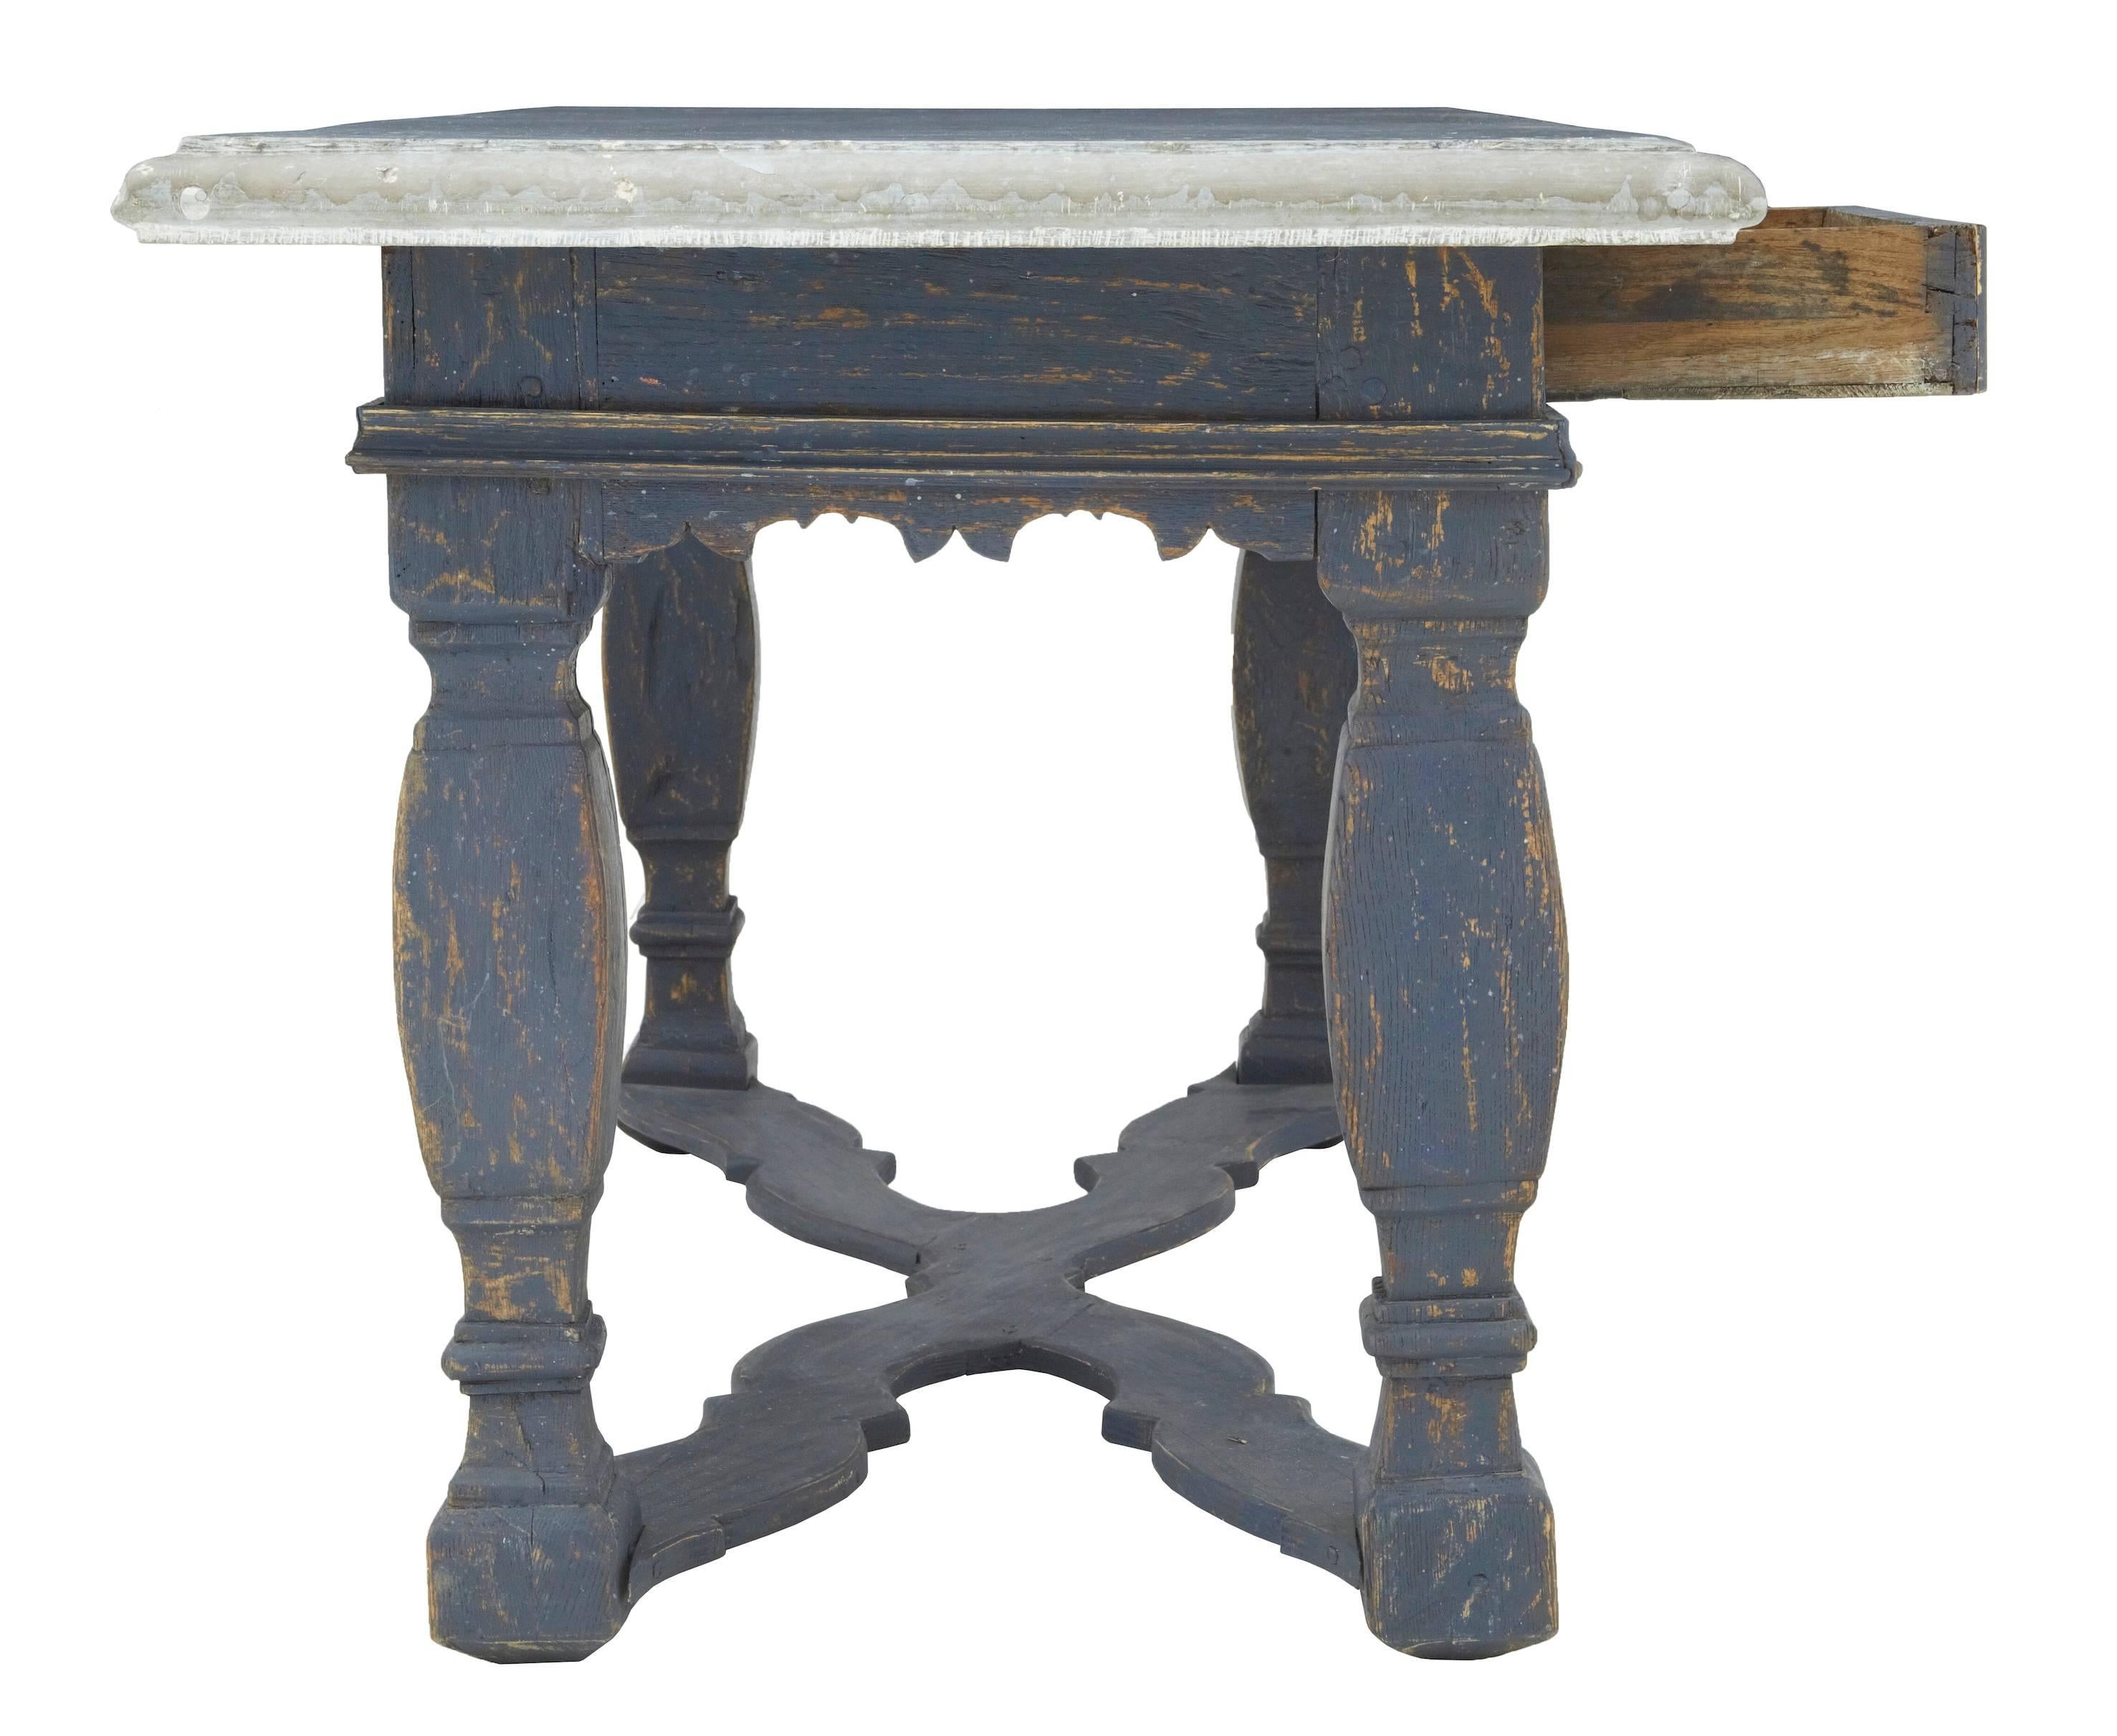 Rare Swedish painted pine table with substantial marble top, circa 1840.
Two-drawer kitchen table with very heavy original marble top.
Bulbous legs united by stretcher.
These types of table are now very rare.

Measures: Height: 32 1/4